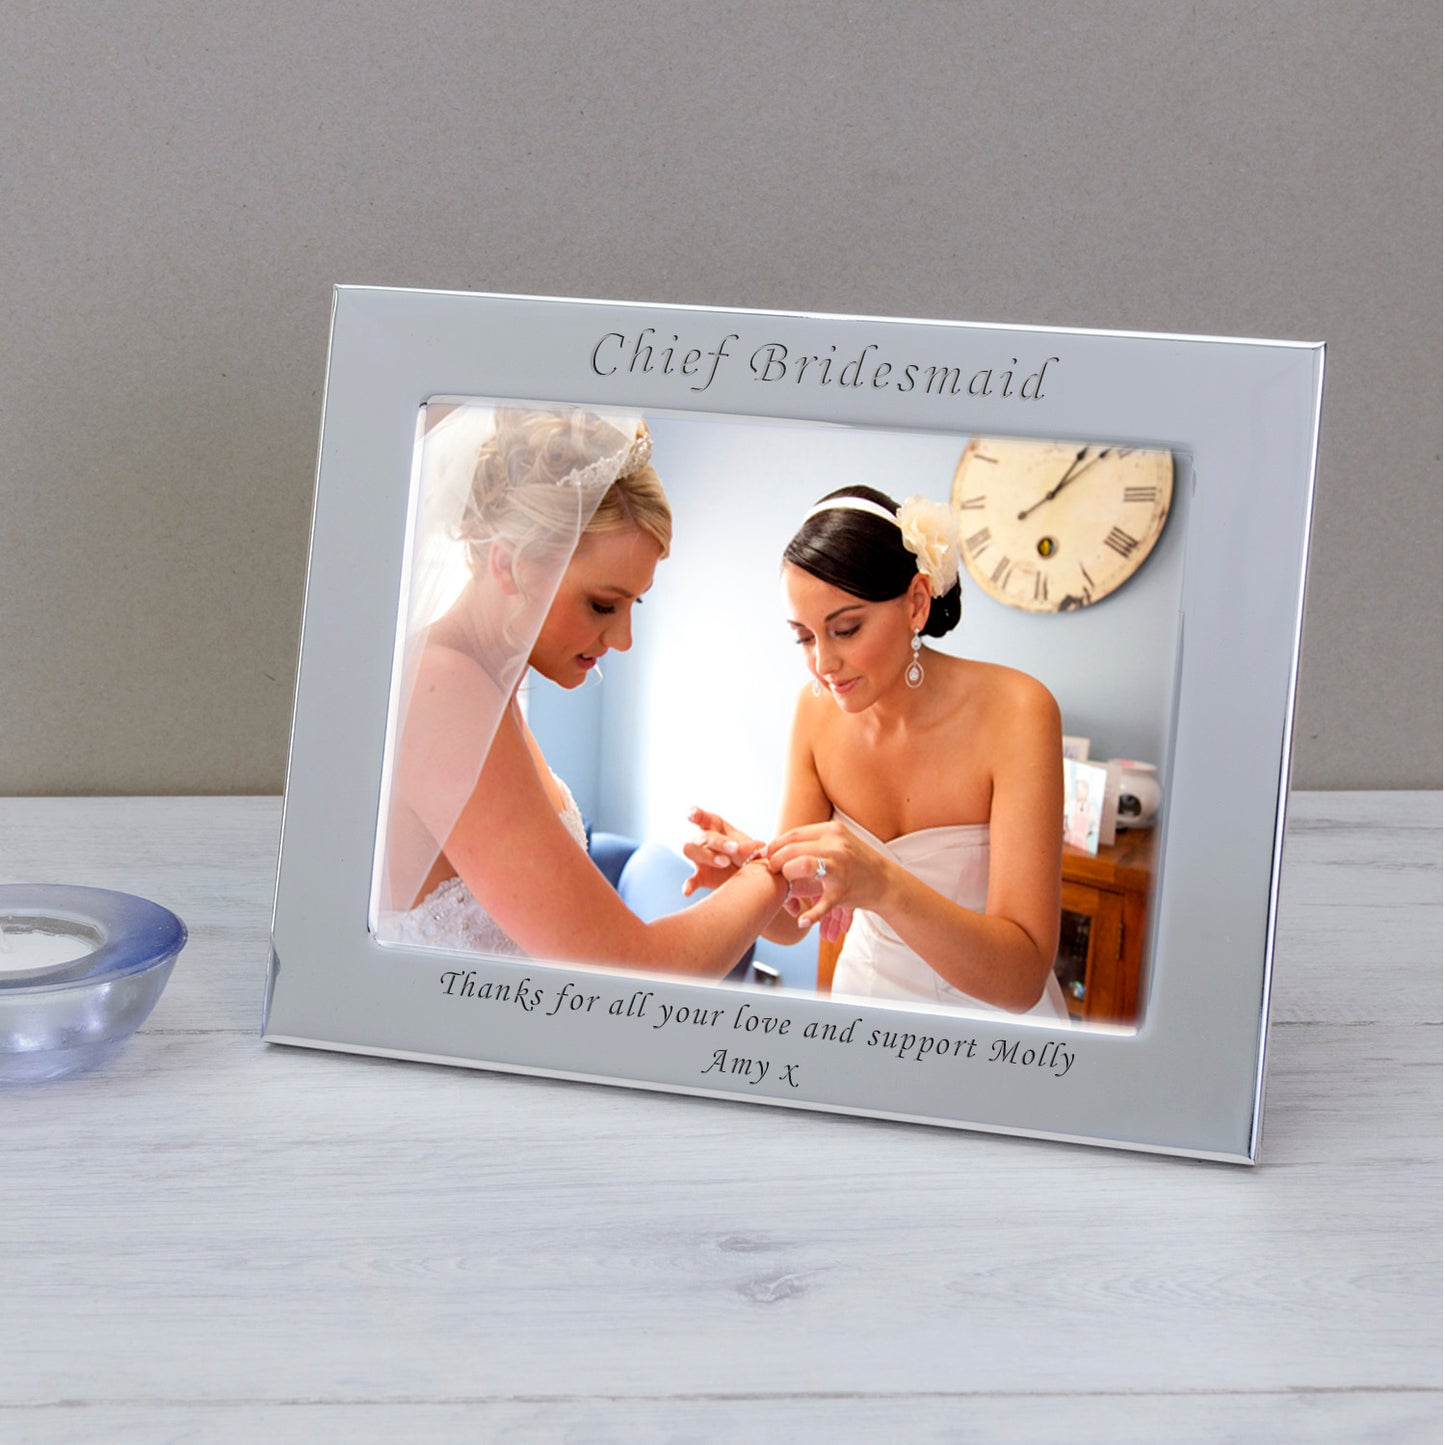 Personalised Chief Bridesmaid Silver Plated Photo Frame